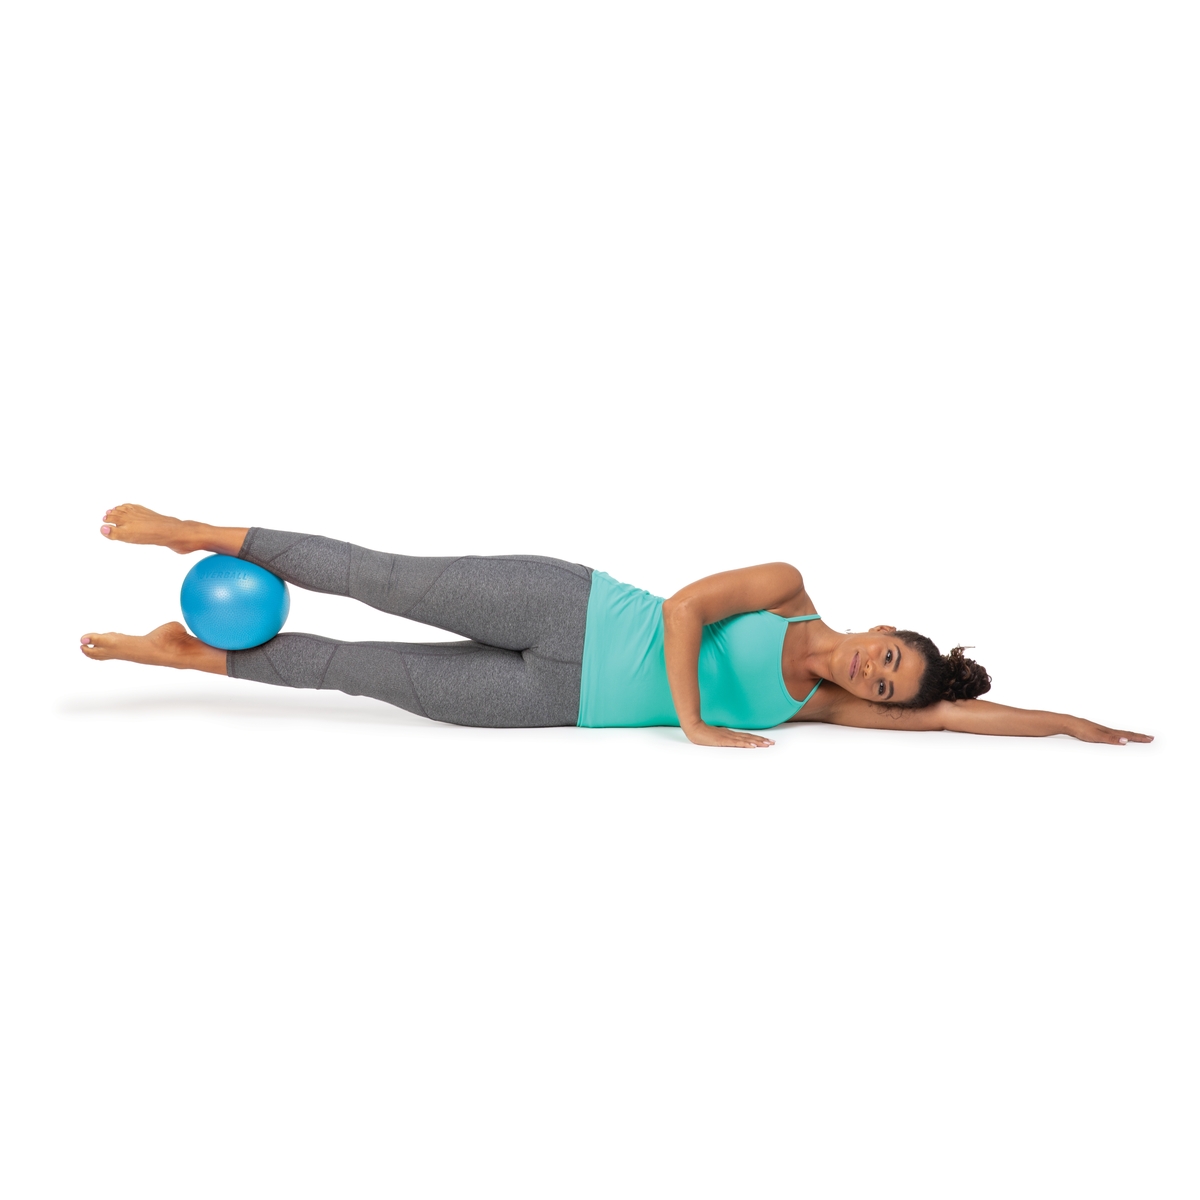 Mini Fitness Ball - Use for Pilates. Inflates with Included Straw. Core  Work. No Pump Necessary!